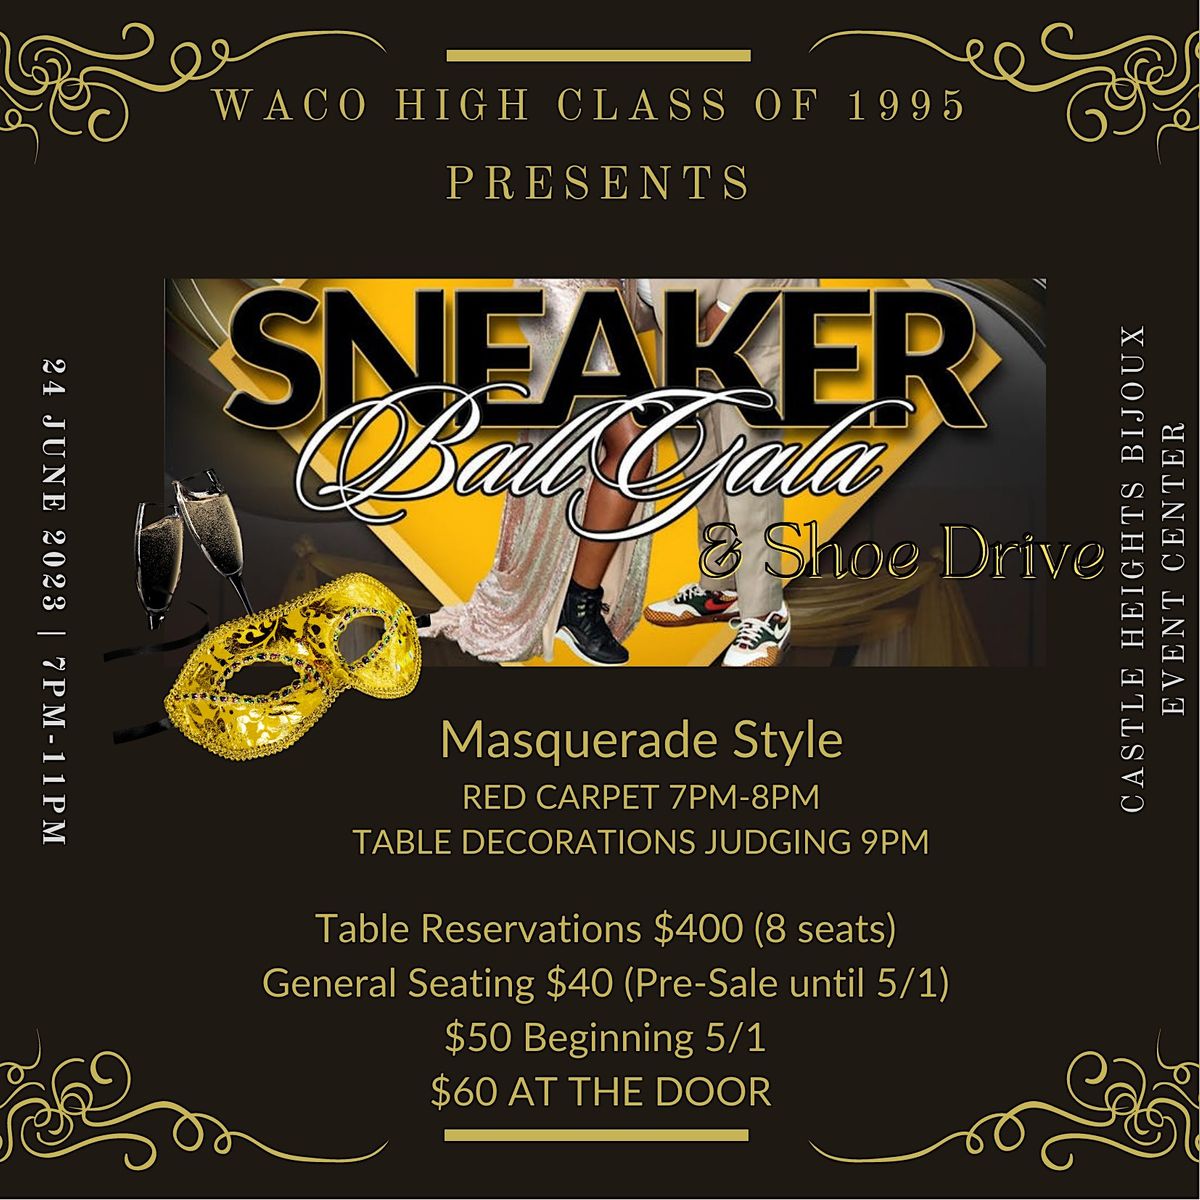 Waco High Class of 1995 Presents: 1st Annual Sneaker Ball and Shoe Drive